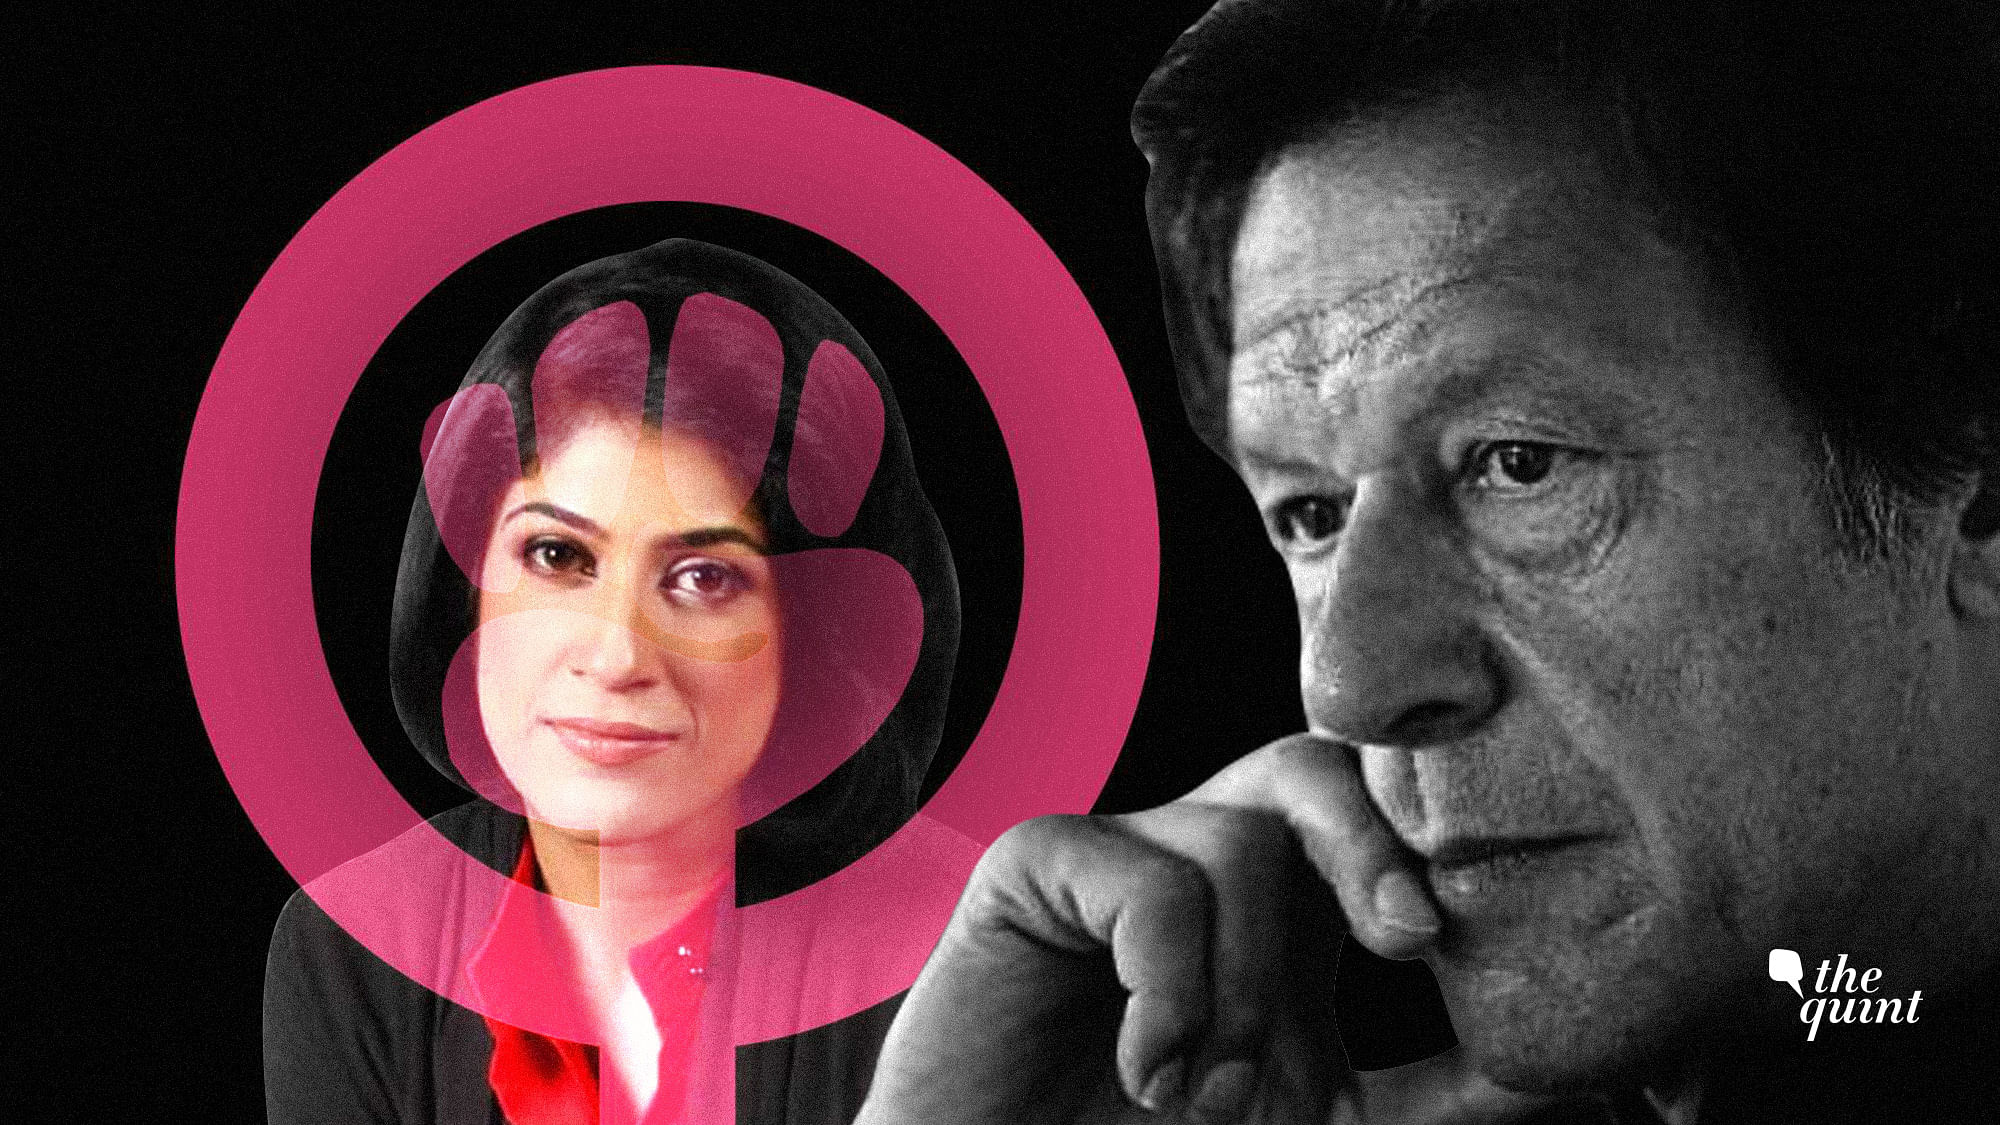 Imran Khan’s remarks demonstrates a poor understanding of how feminism has shaped global debate and laws on the rights of mothers.